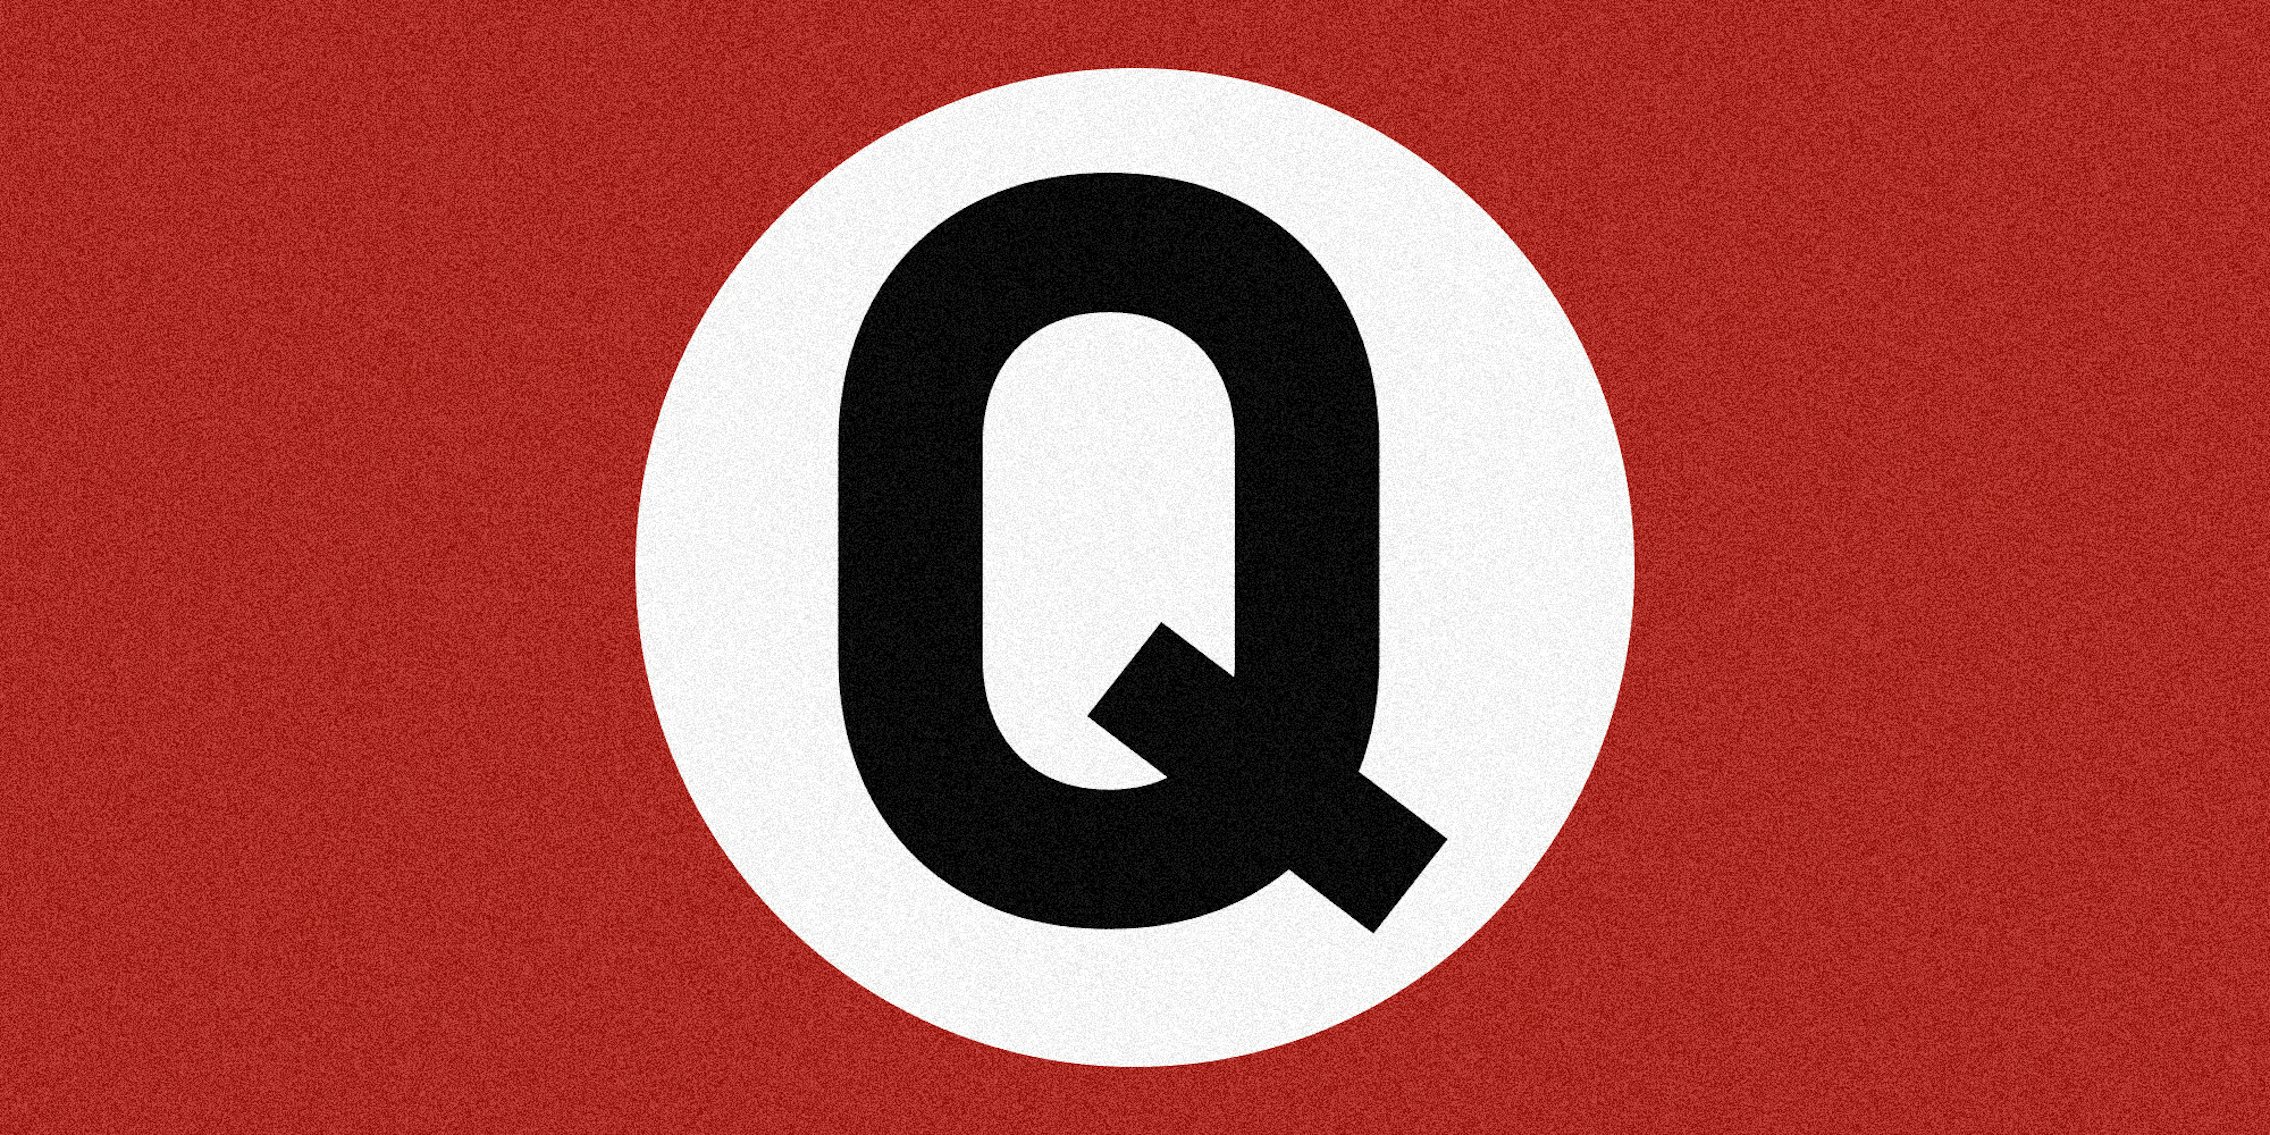 Q replaces swastika in white circle on red field